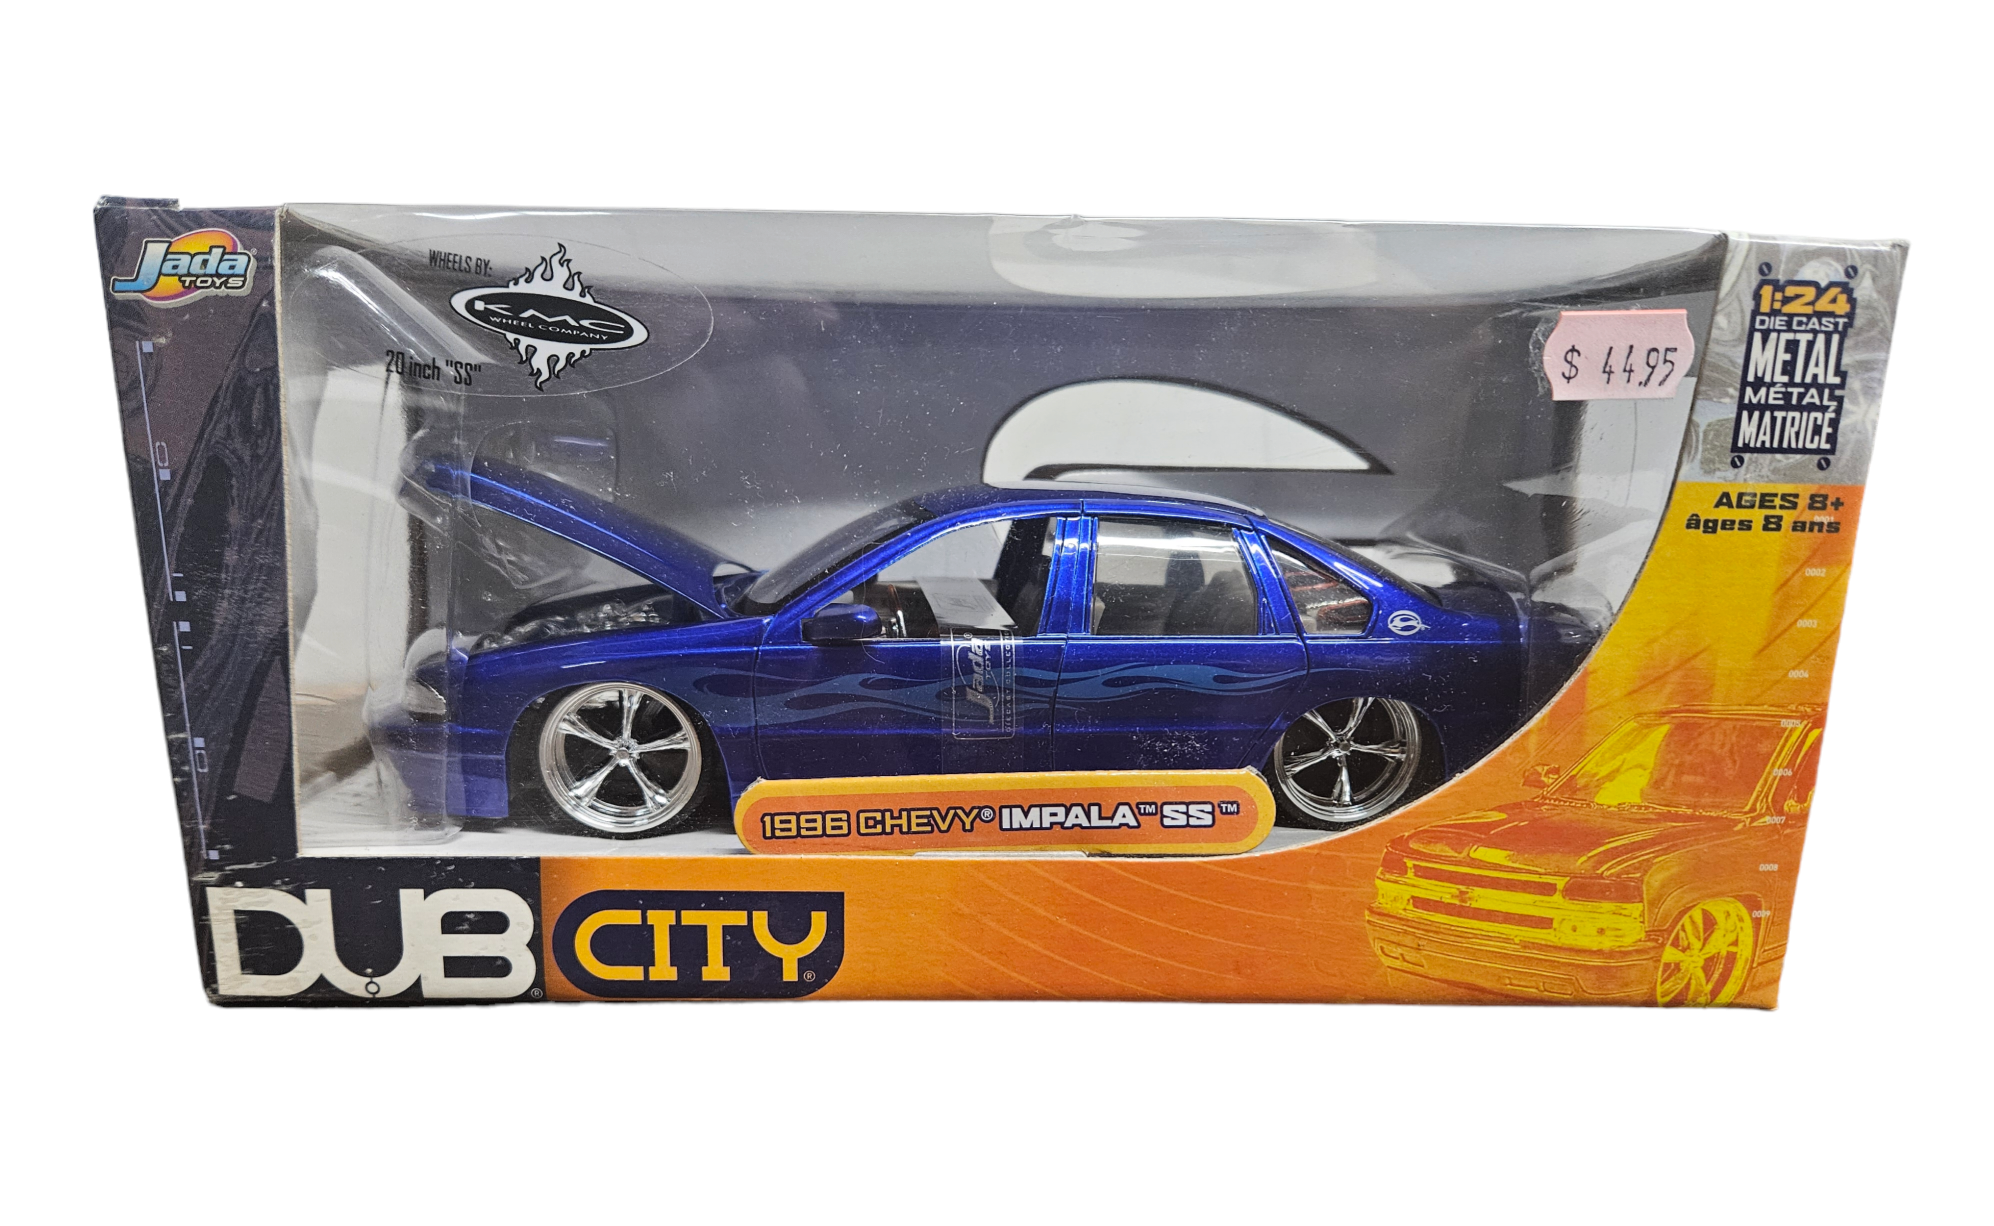 1996 Chevrolet Impala SS, Blue with KMC wheels in 1:24